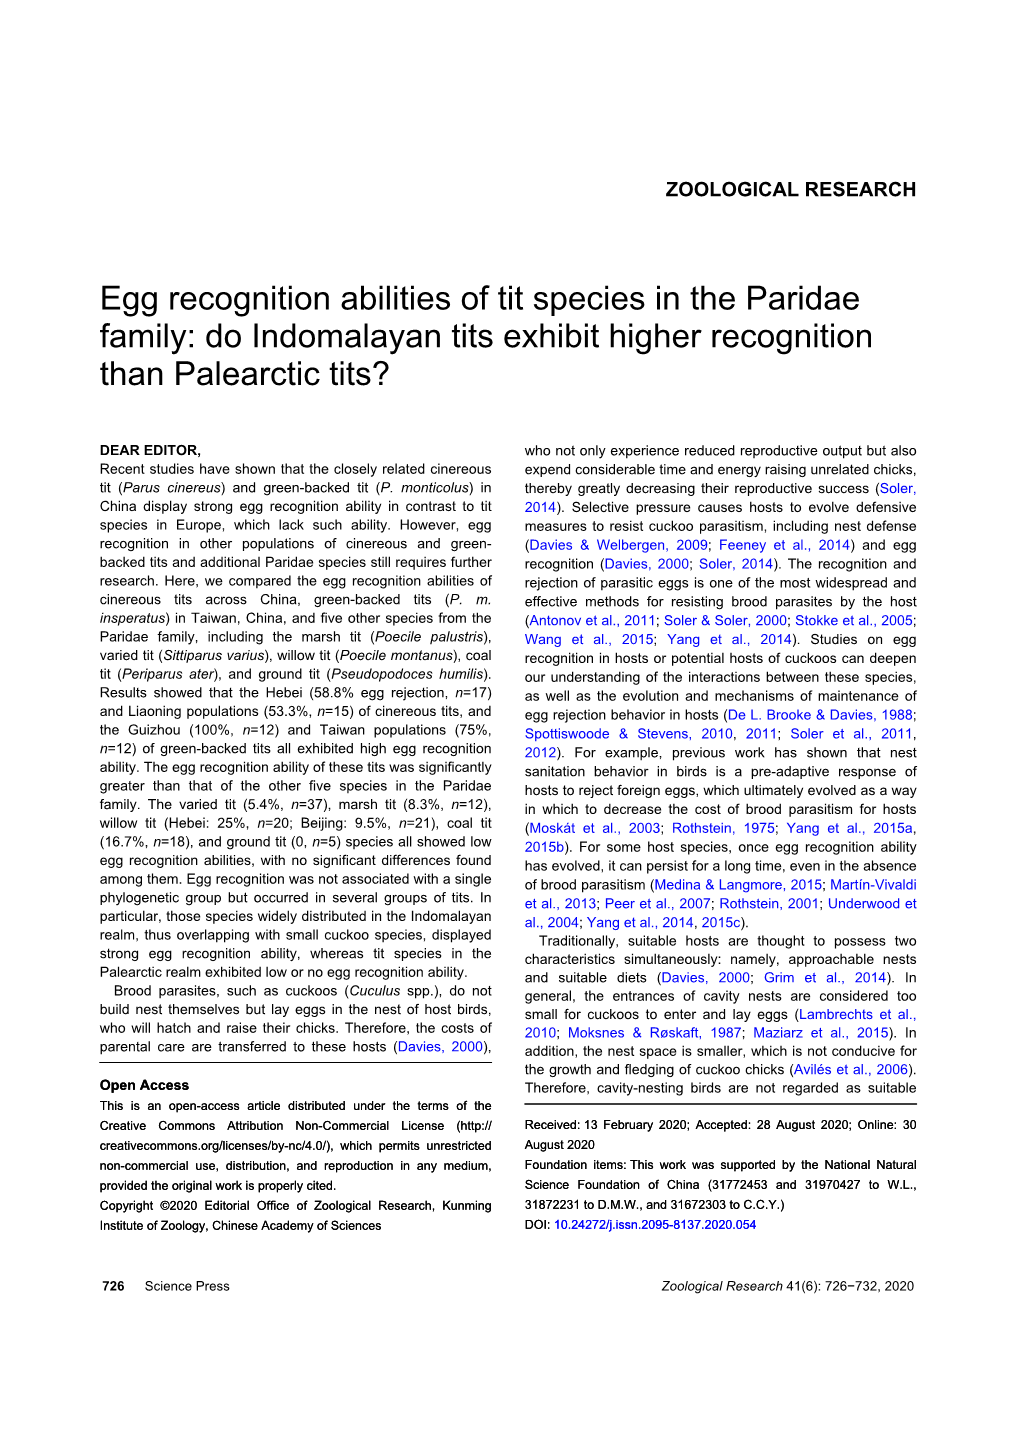 Egg Recognition Abilities of Tit Species in the Paridae Family: Do Indomalayan Tits Exhibit Higher Recognition Than Palearctic Tits?